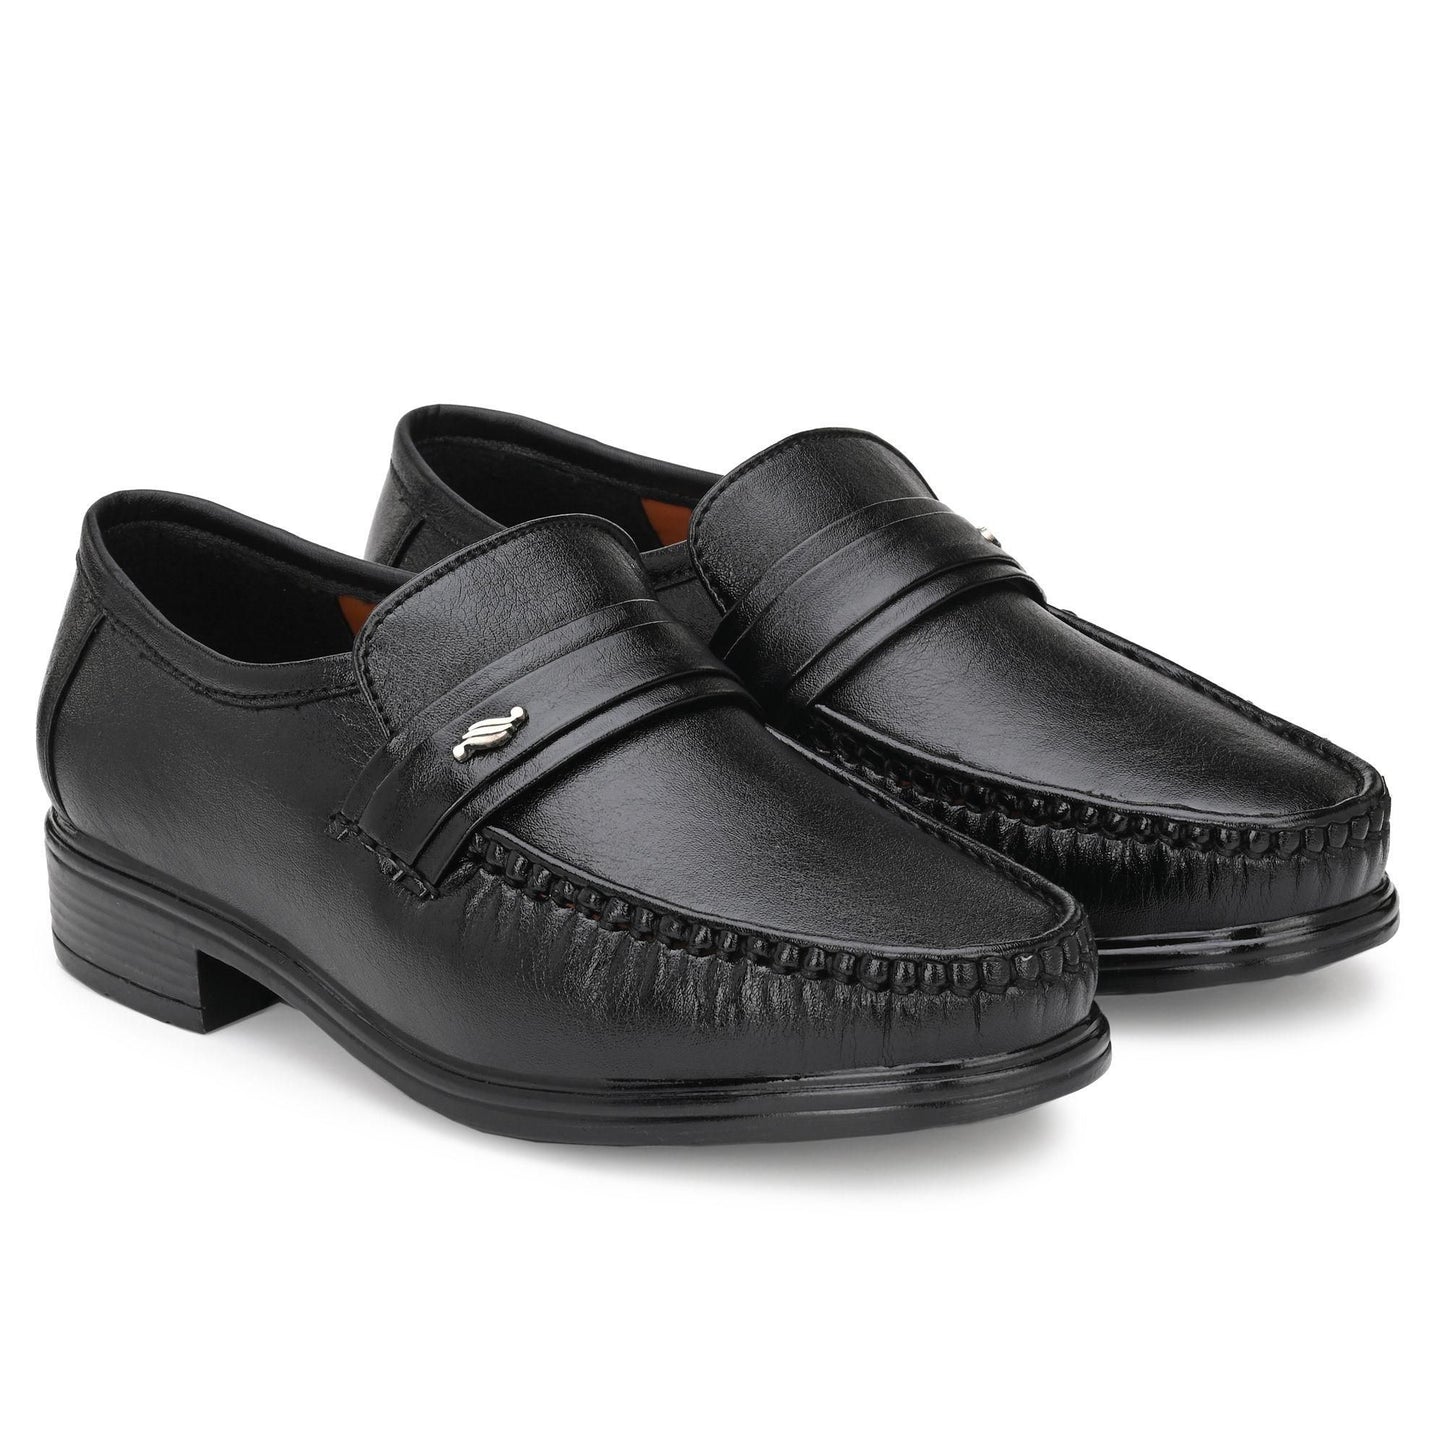 AM PM Synthetic Leather Formal Shoe